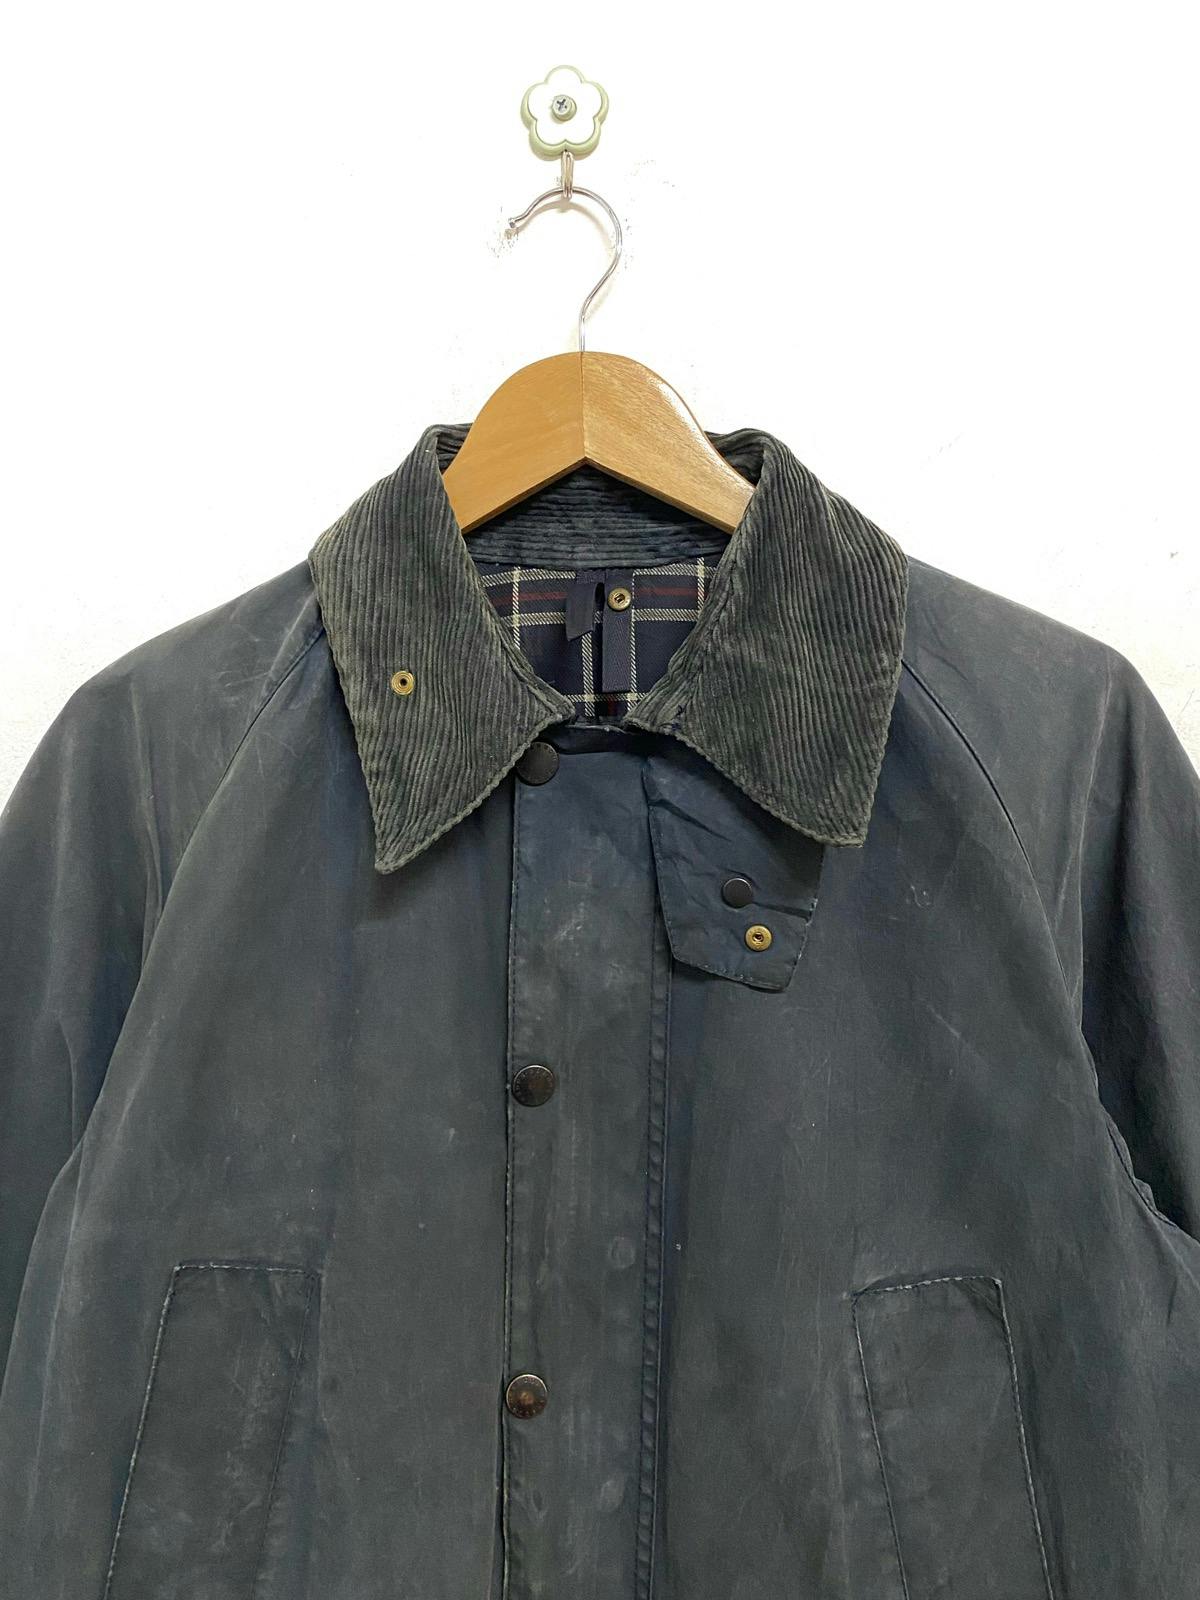 Barbour Bedale A105 Wax Jacket Made in England - 3